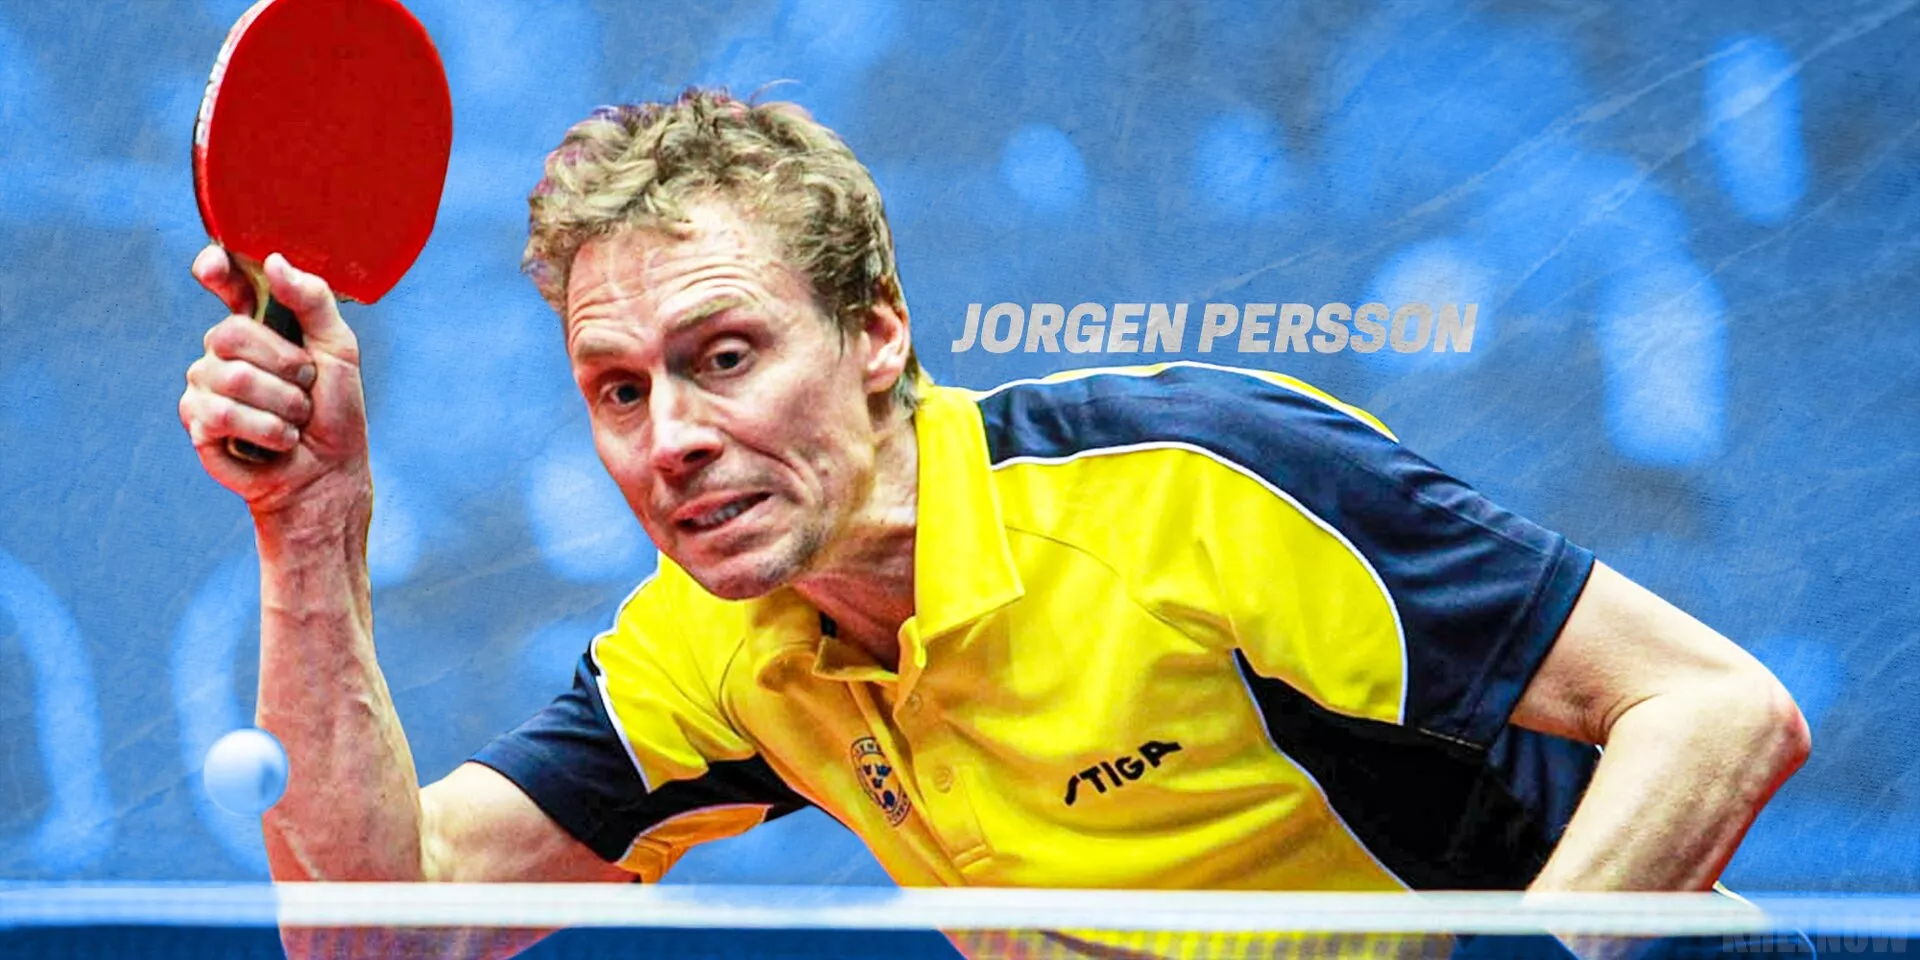 India on positive track with table tennis growth, says Sweden TT coach Jorgen Persson